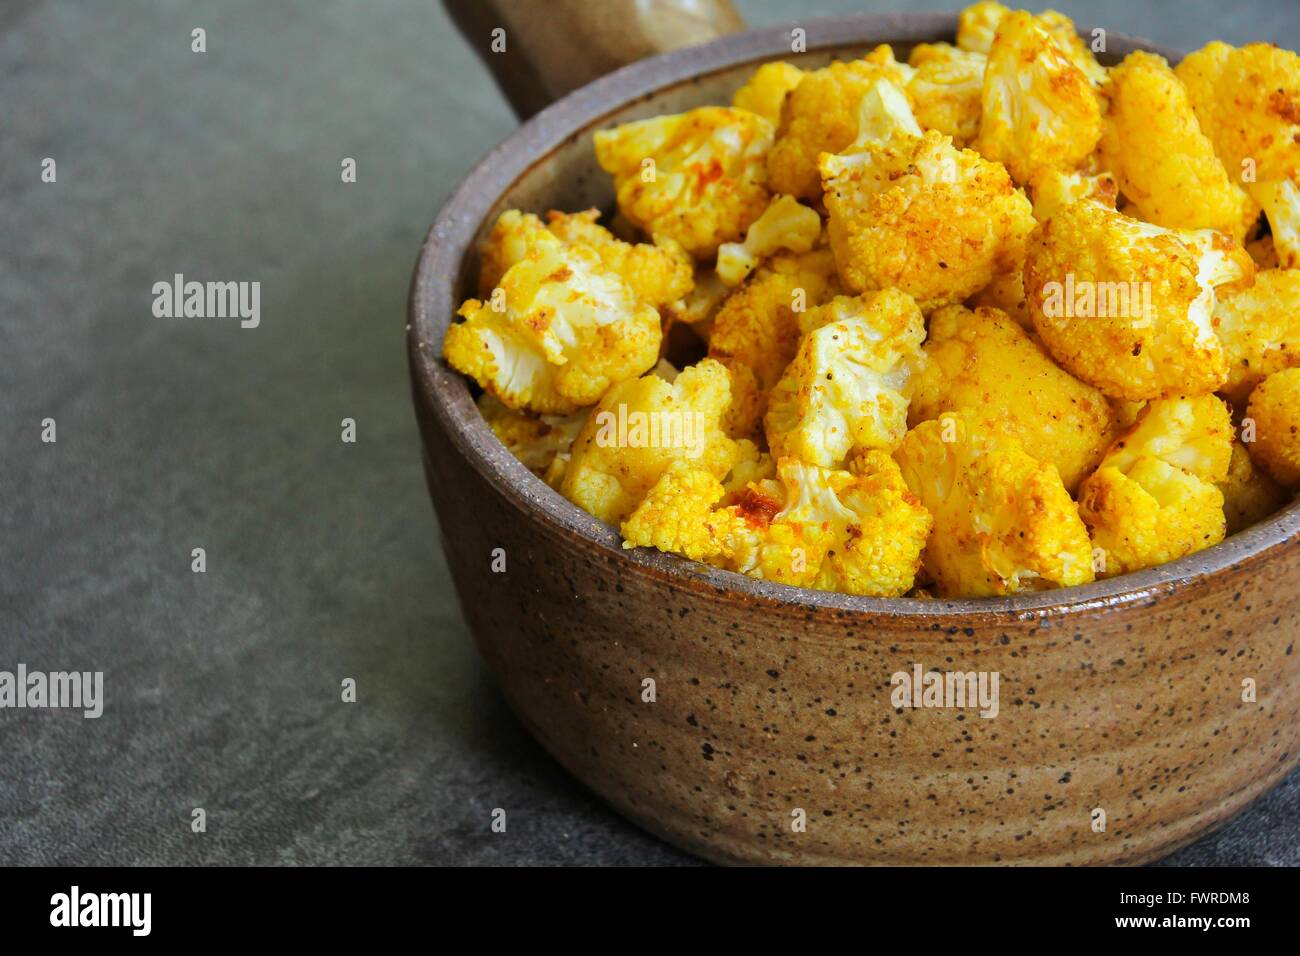 Healthy food - Oven Roasted Cauliflower in ceramic pot Stock Photo